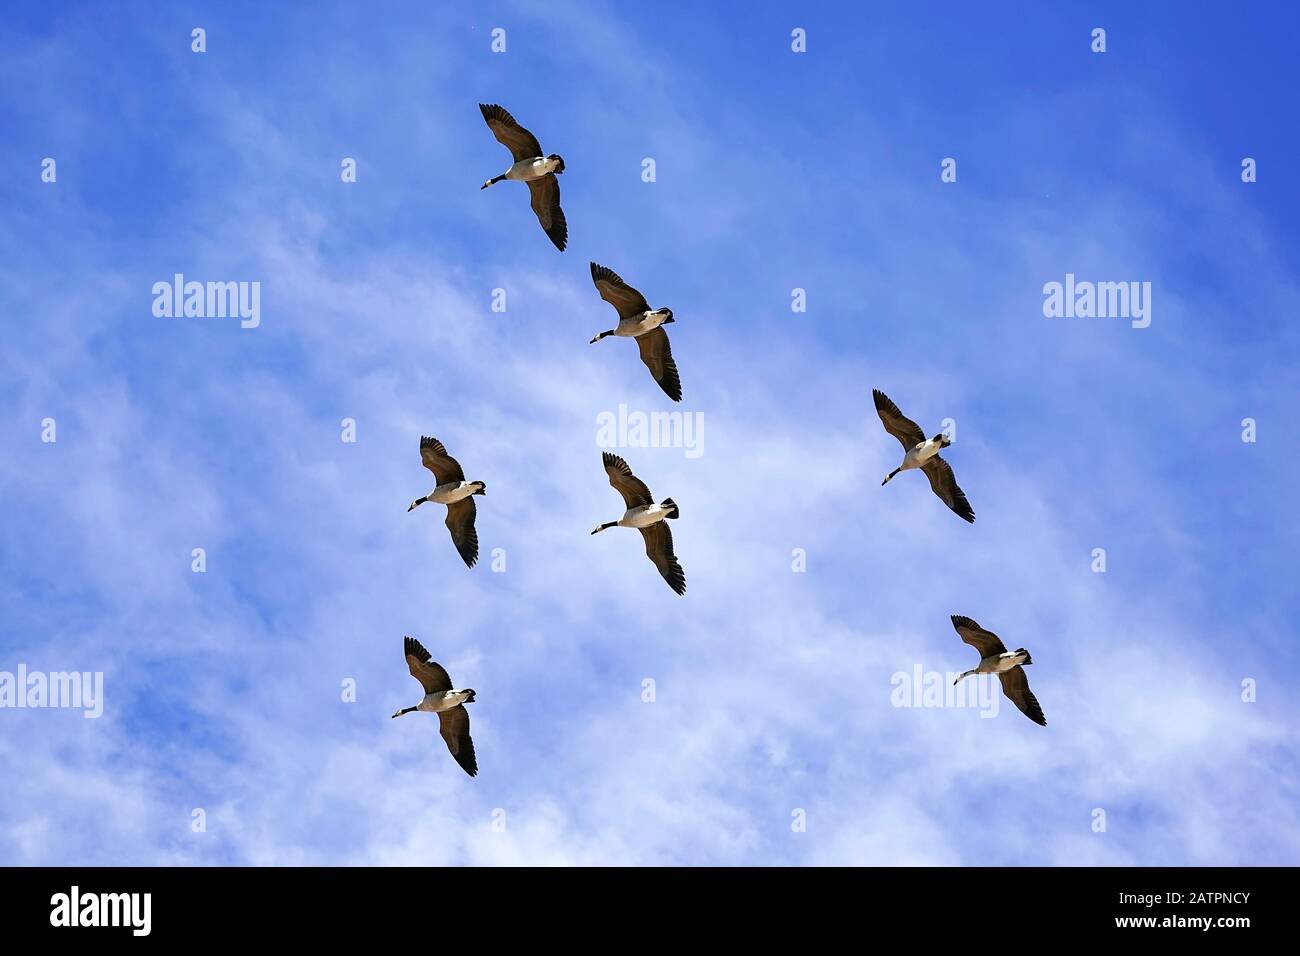 A flock of 7 Canadian geese flying in formation with a blue sky and clouds. Scottsdale, Arizona. Stock Photo